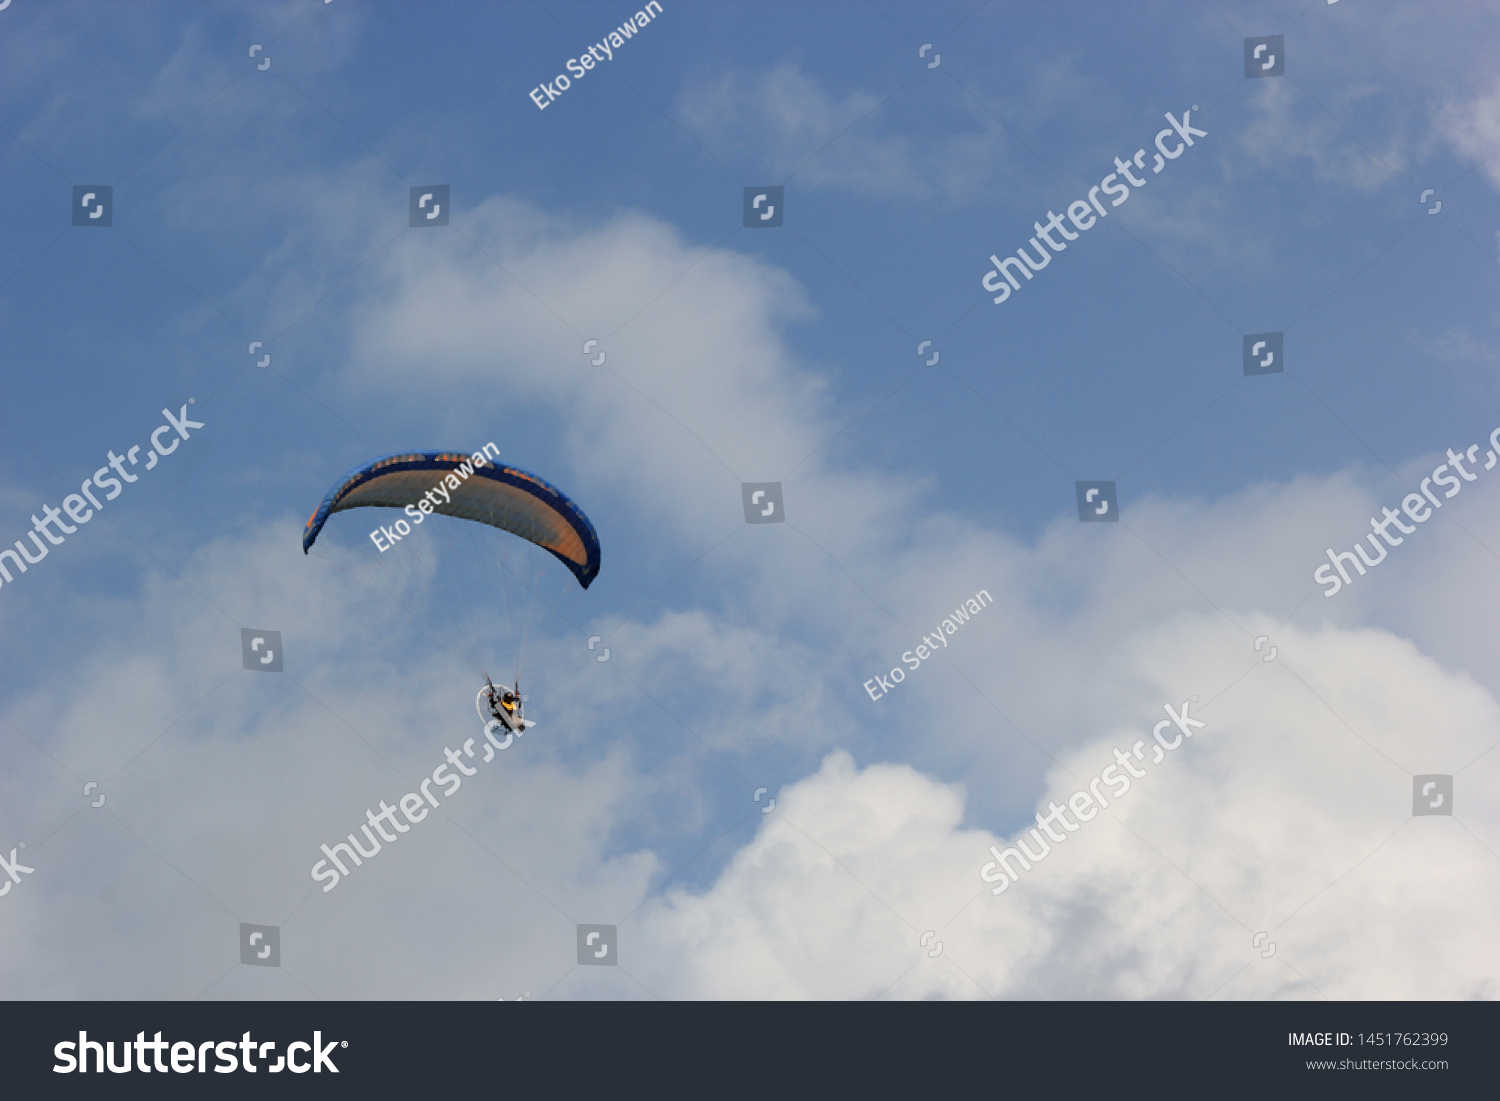 Paragliding pilots are flying over the clouds of Parangkusumo beach, Yogyakarta, Indonesia. February 17, 2018 #1451762399